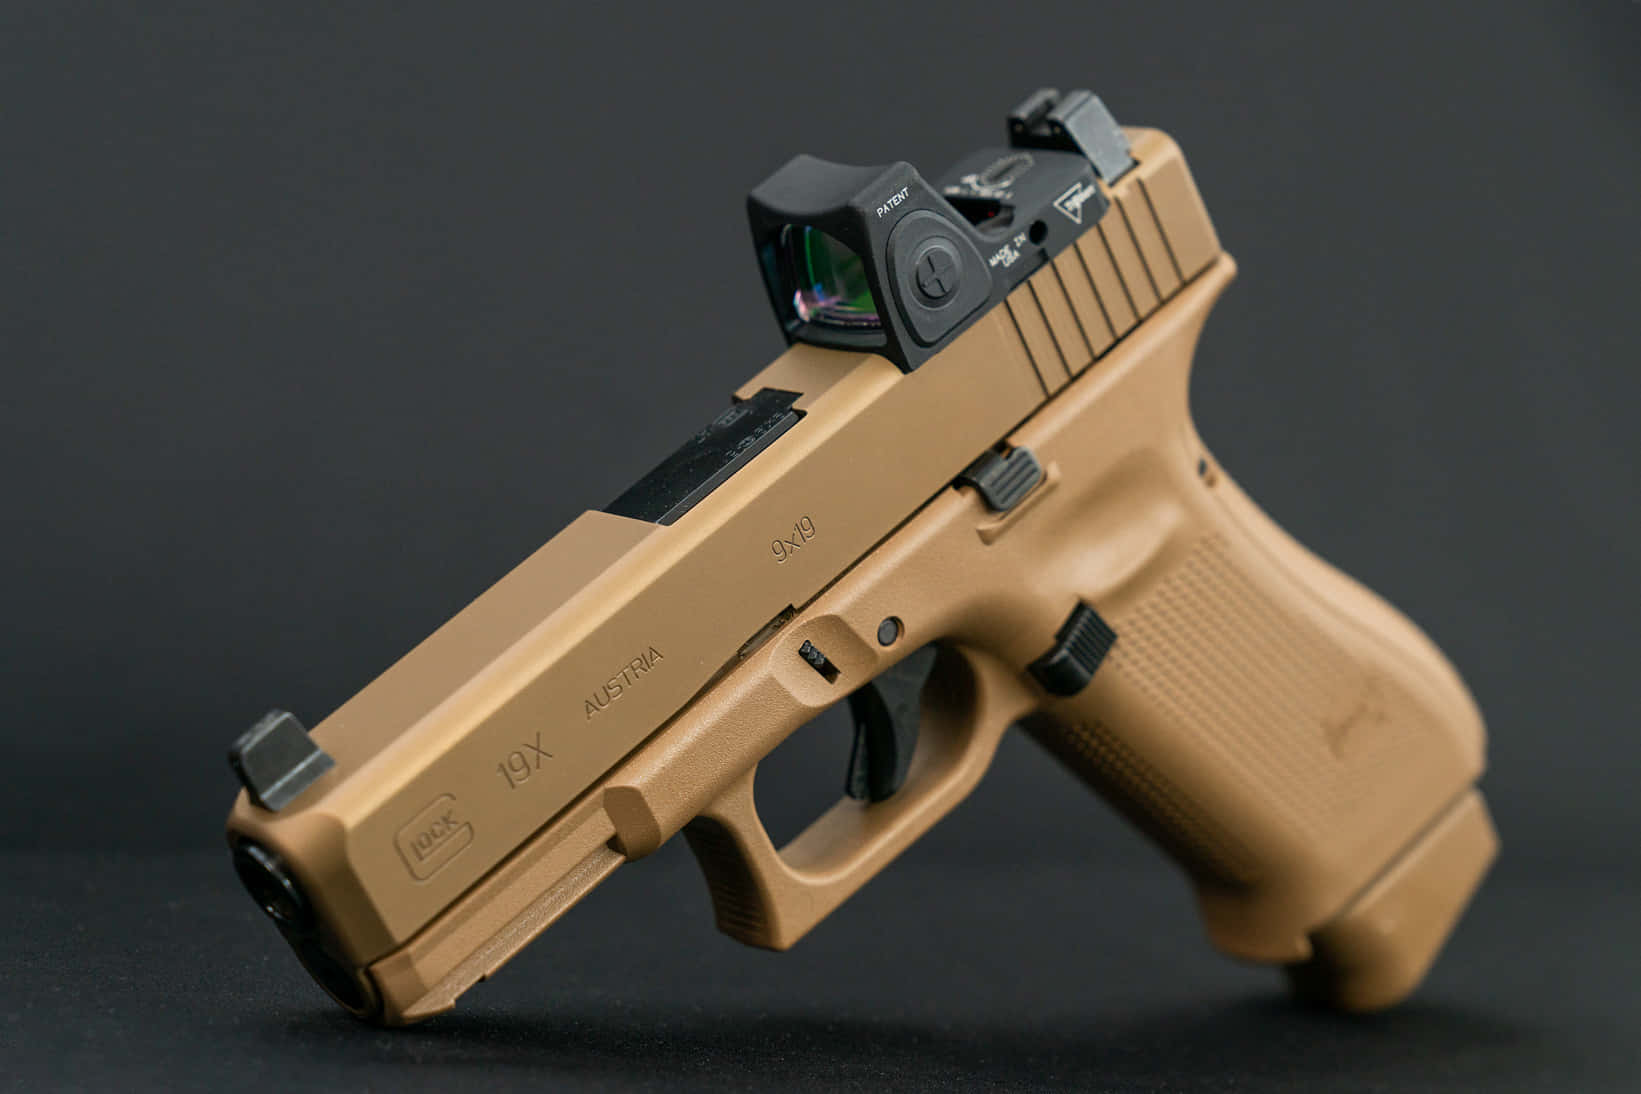 A Tan Pistol With A Red Laser Sight